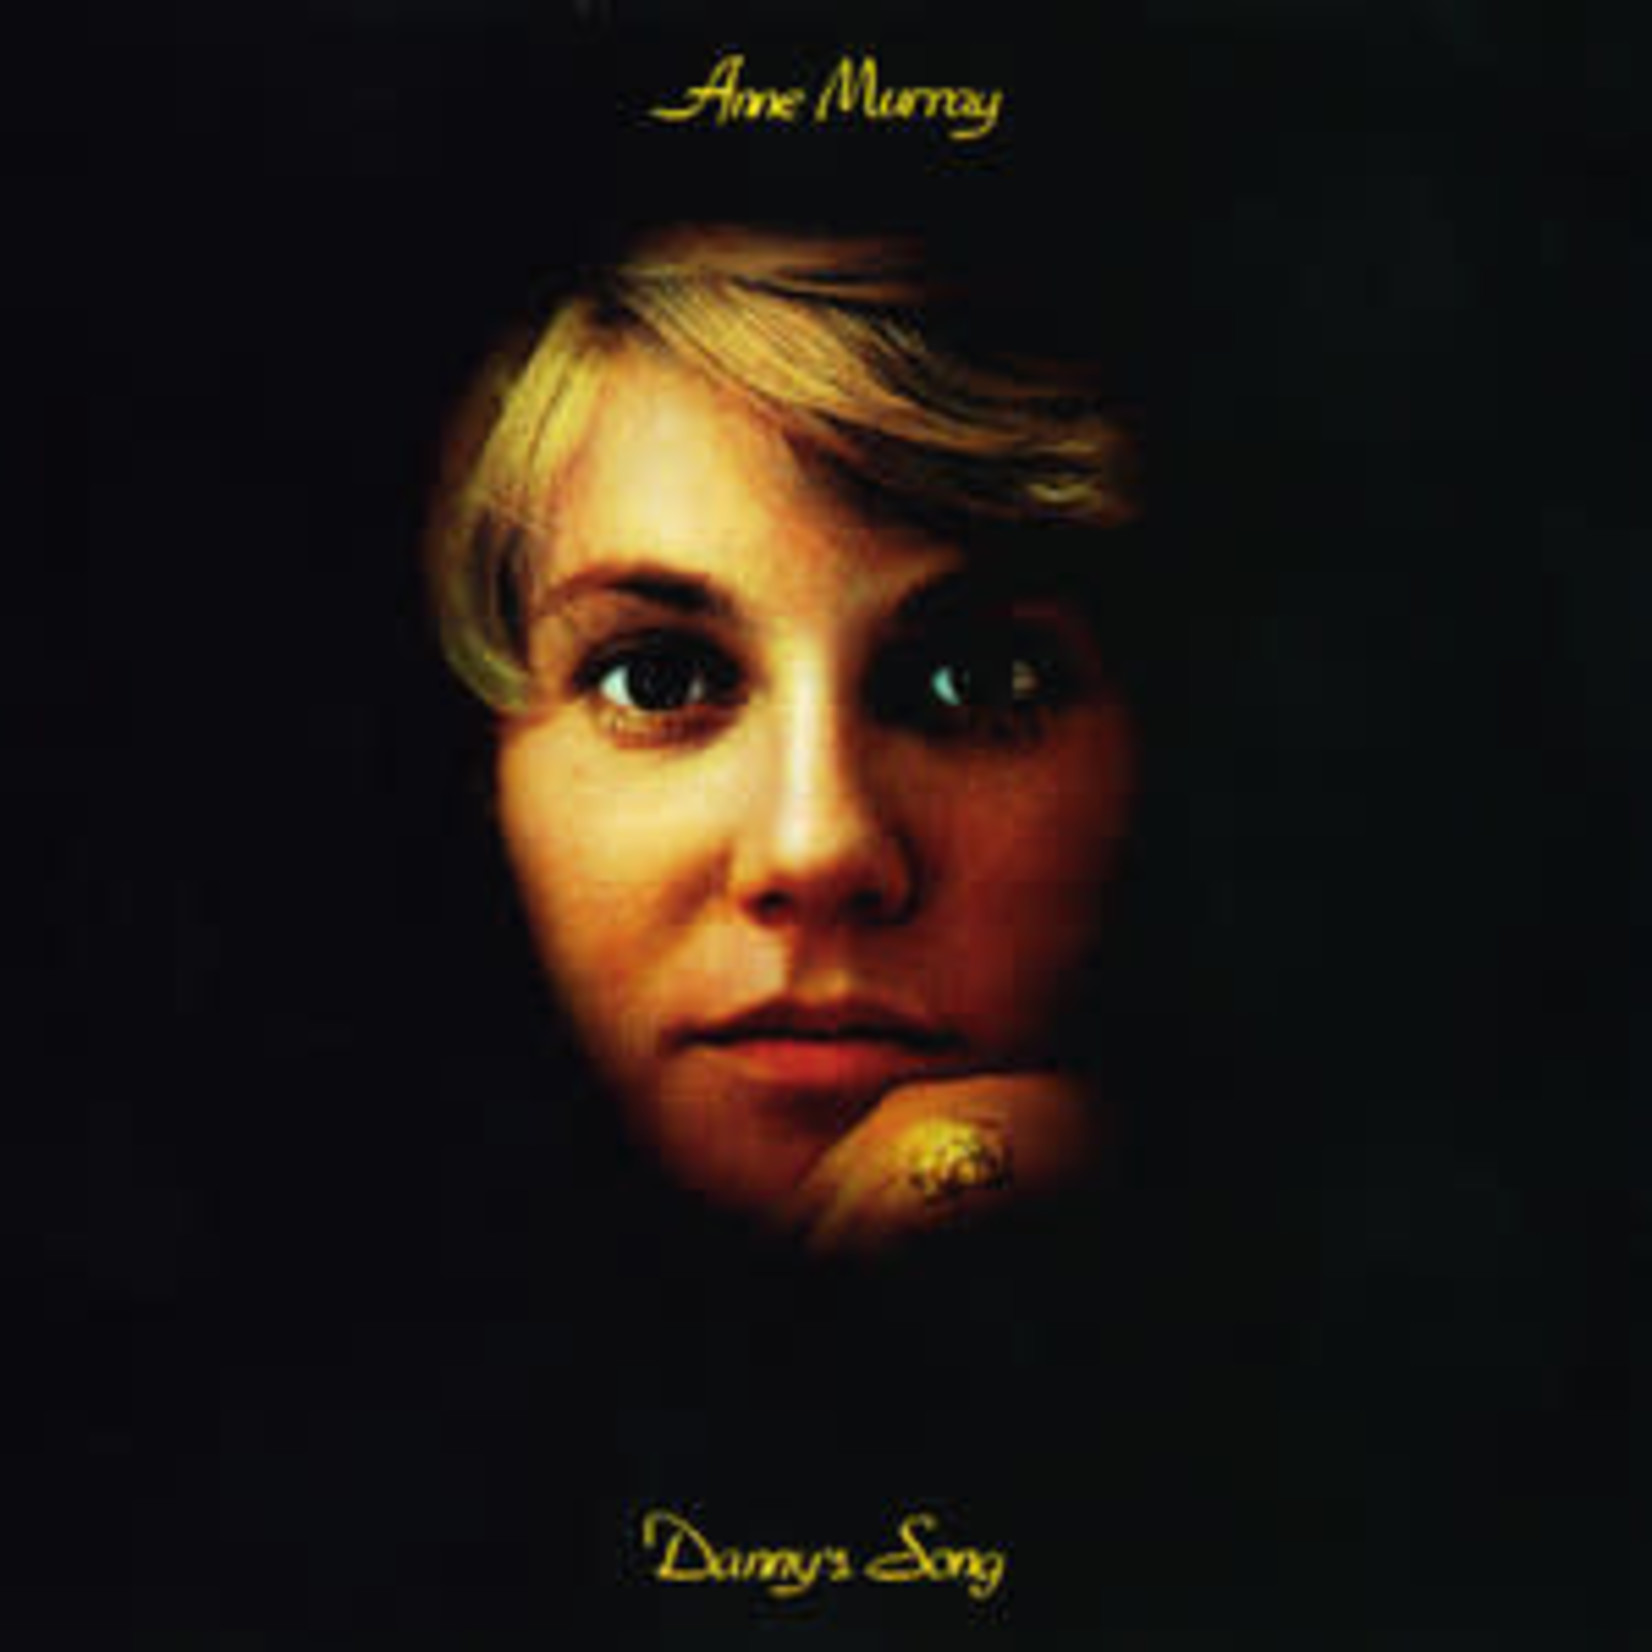 [Vintage] Anne Murray - Danny's Song